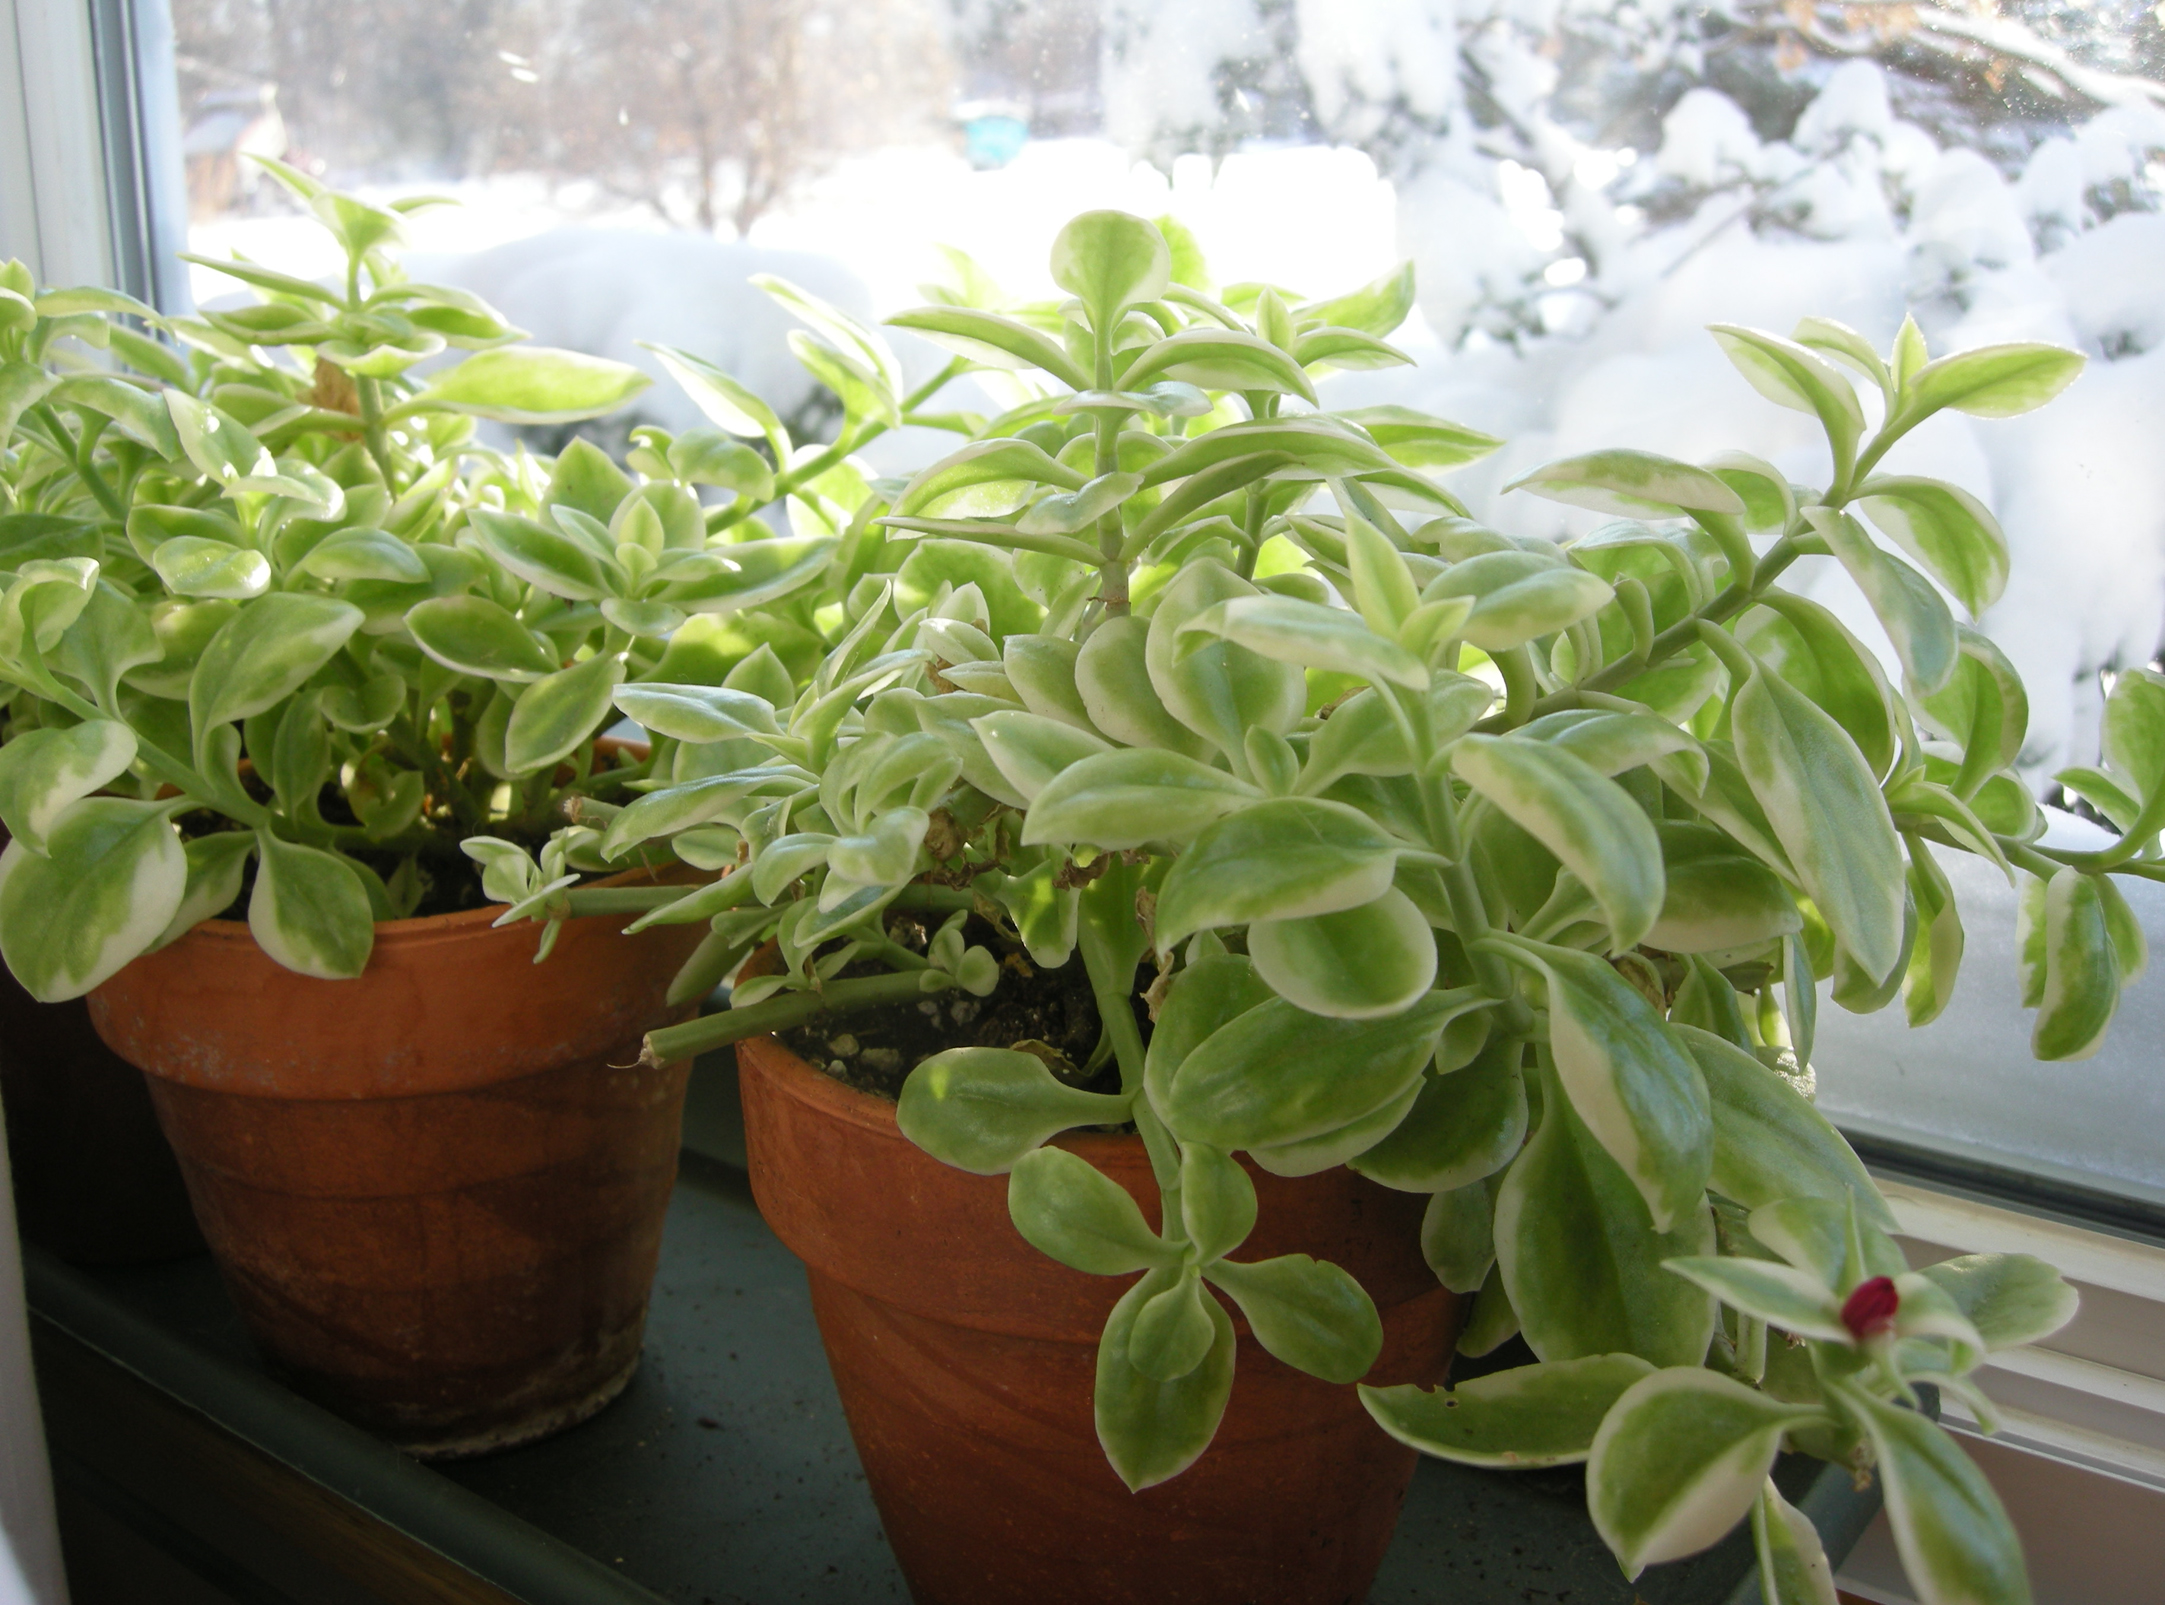 Succulent Mezoo Trailing Red spends the winter on a sunny window sill in snowy January waiting to be potted outdoors in summer container plantings.
